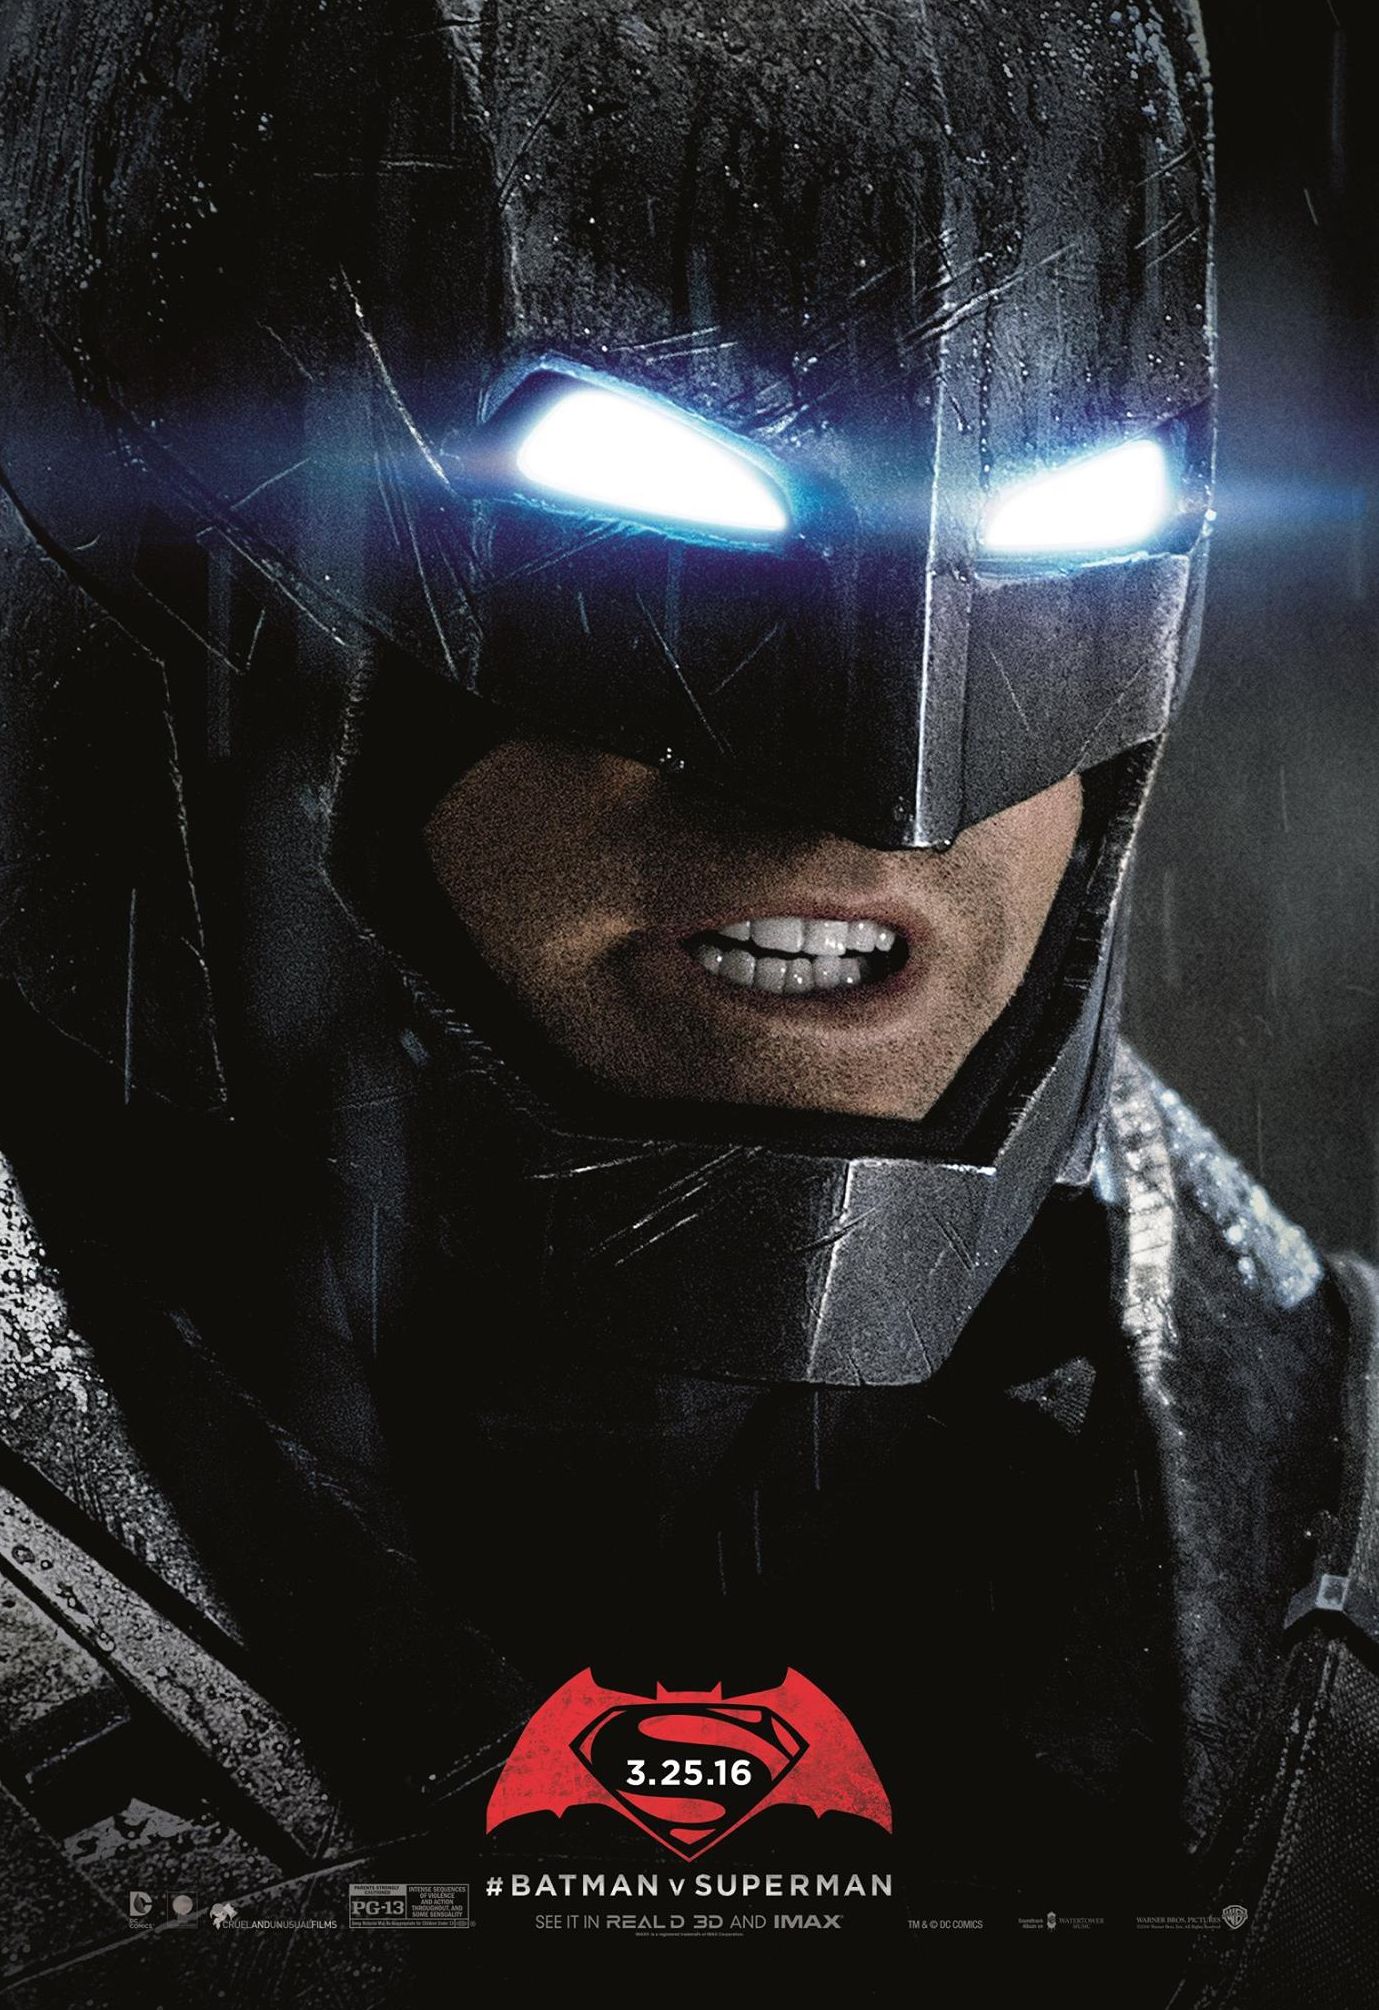 Get up close and personal with this unused poster for Batman